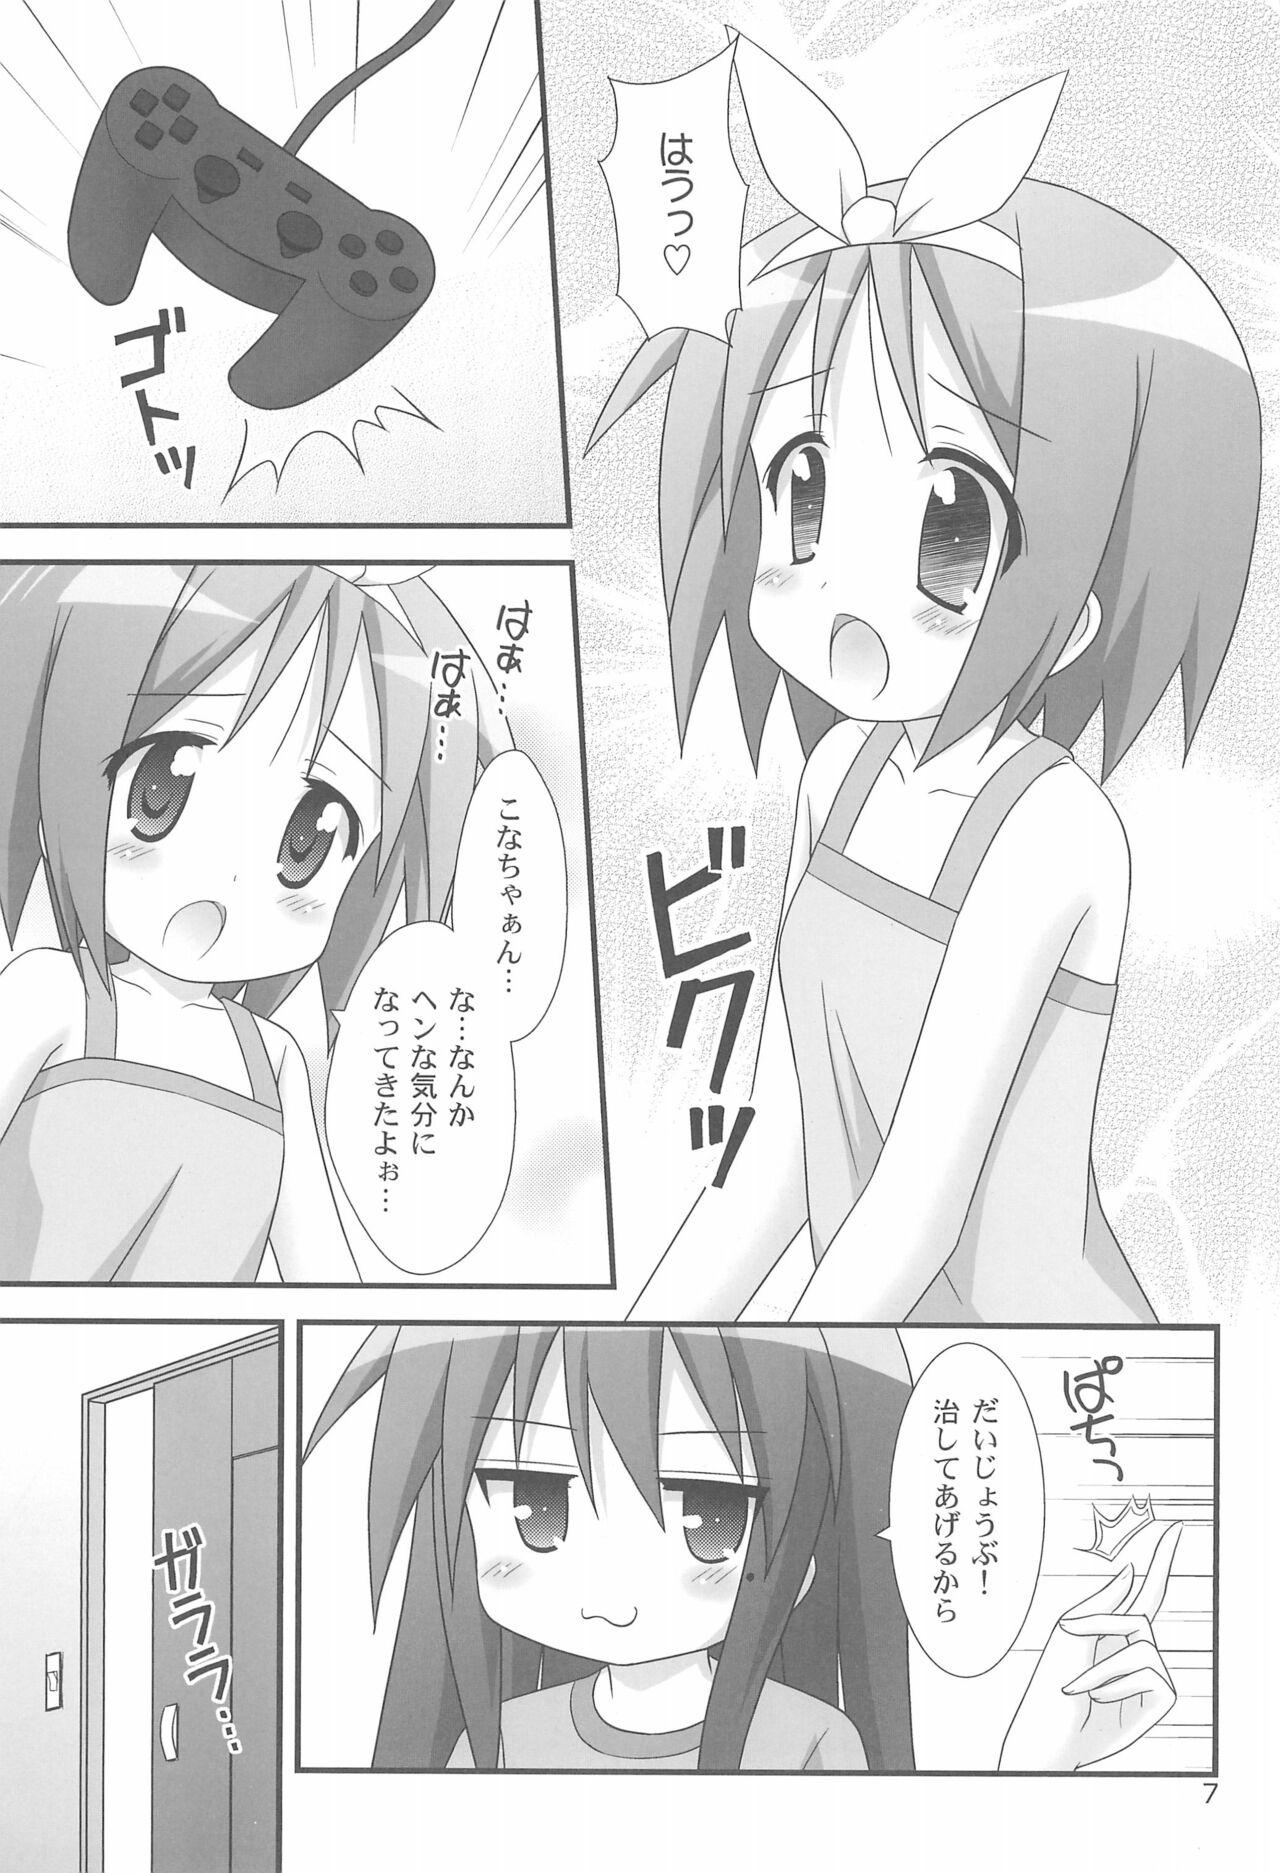 Panty Love Choco - Lucky star Pete - Page 7